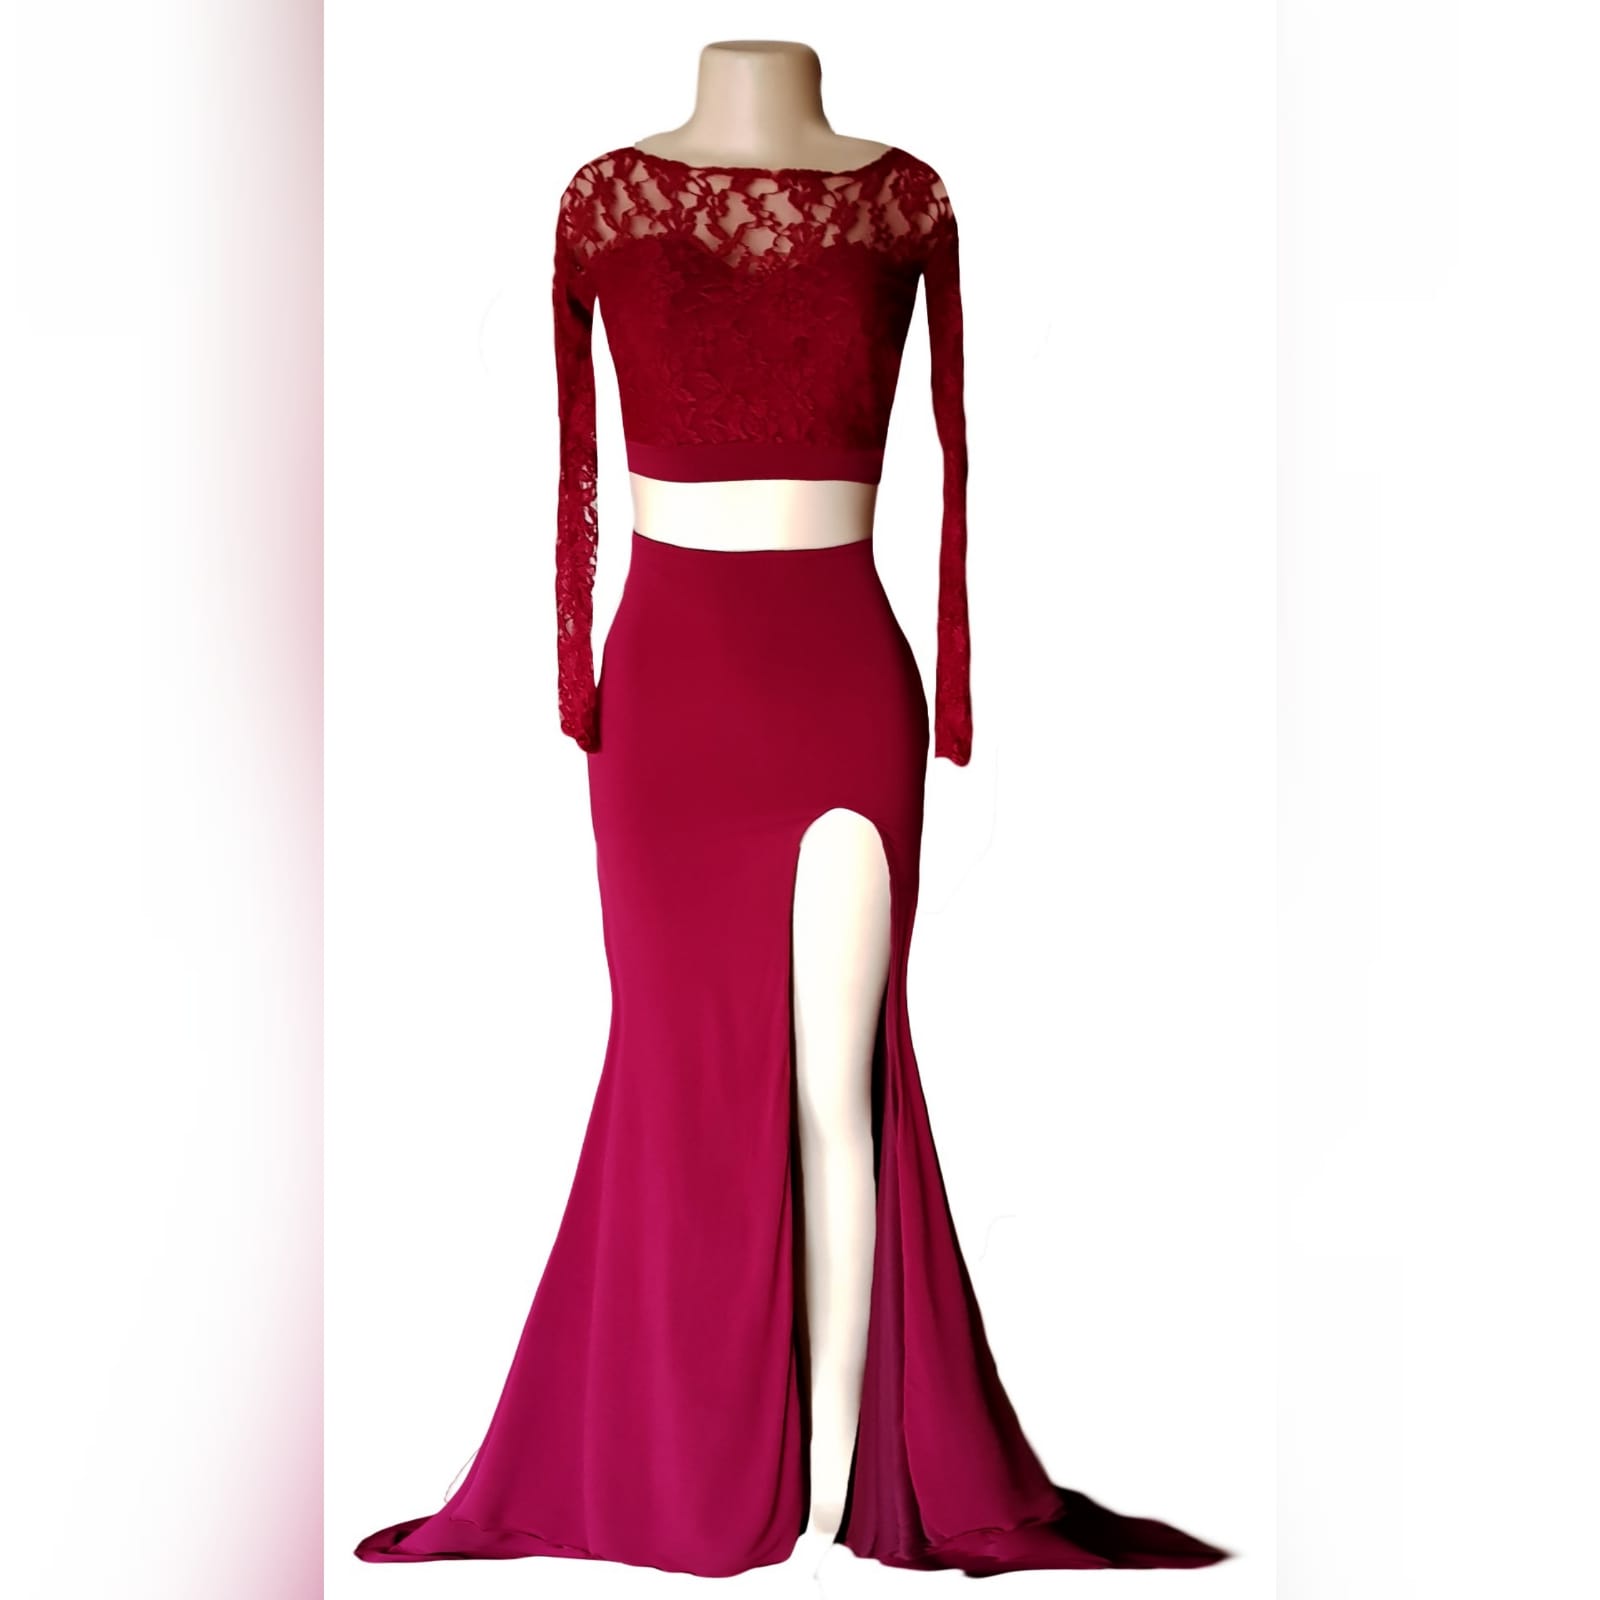 Deep red long sheer lace bodice prom dress 7 deep red long sheer lace bodice prom dress. Long off the shoulder lace sleeves with a rounded open back, slit and train.